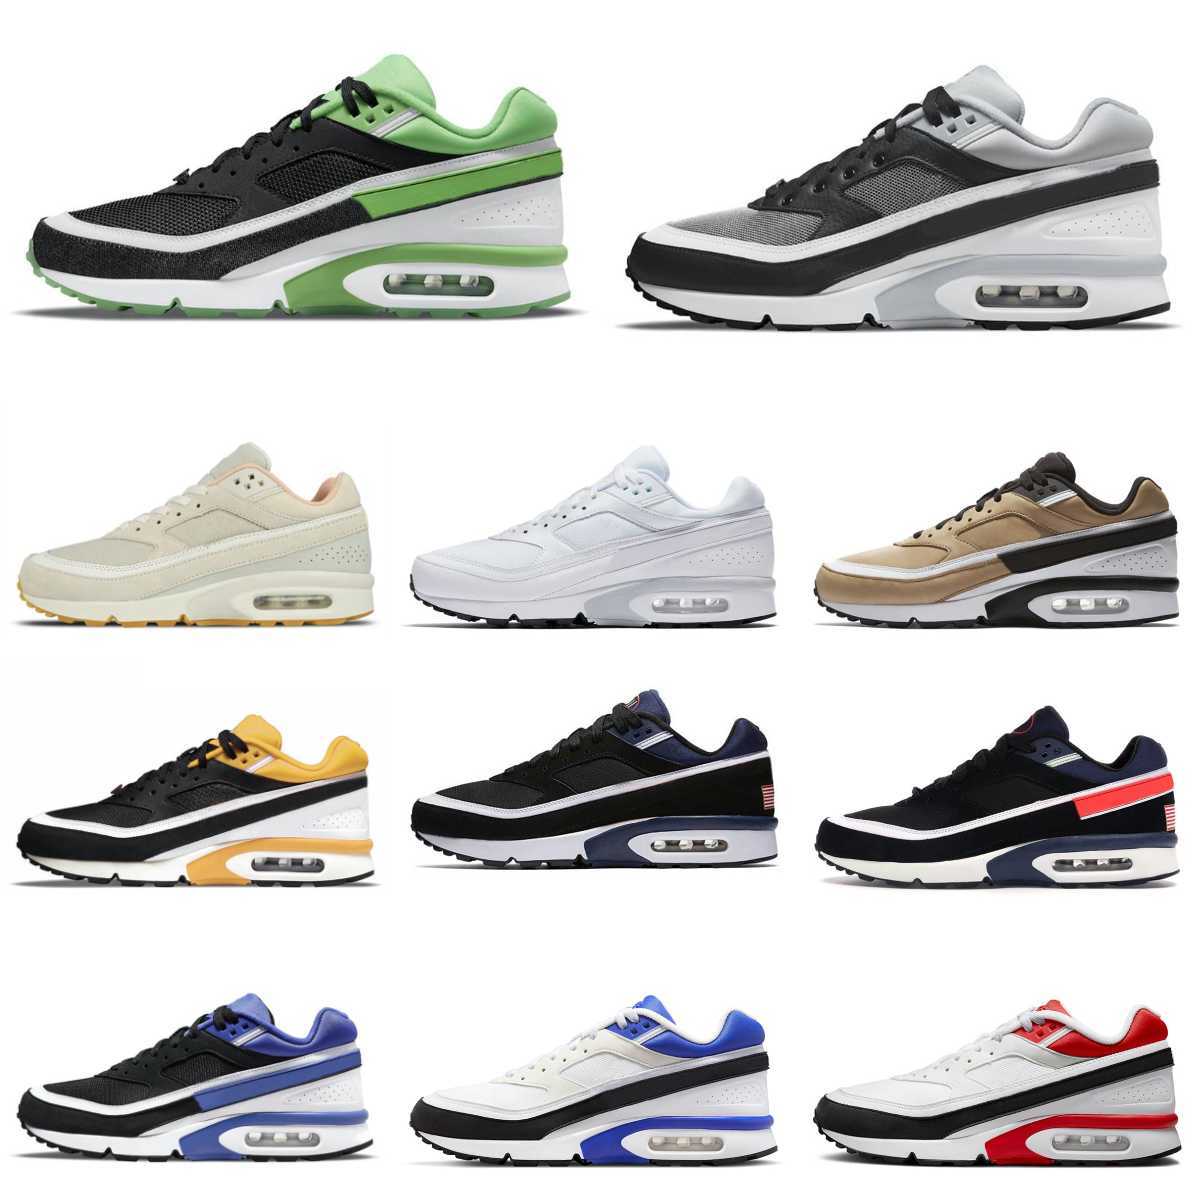 

Trainer Mens Bw Sports Shoes Reverse White Persian Violet Sport Red Trainers Grey Neon Women Marina Light Stone Milk Jade Airs Rotterdam Lyon Designer Sneakers, Please contact us